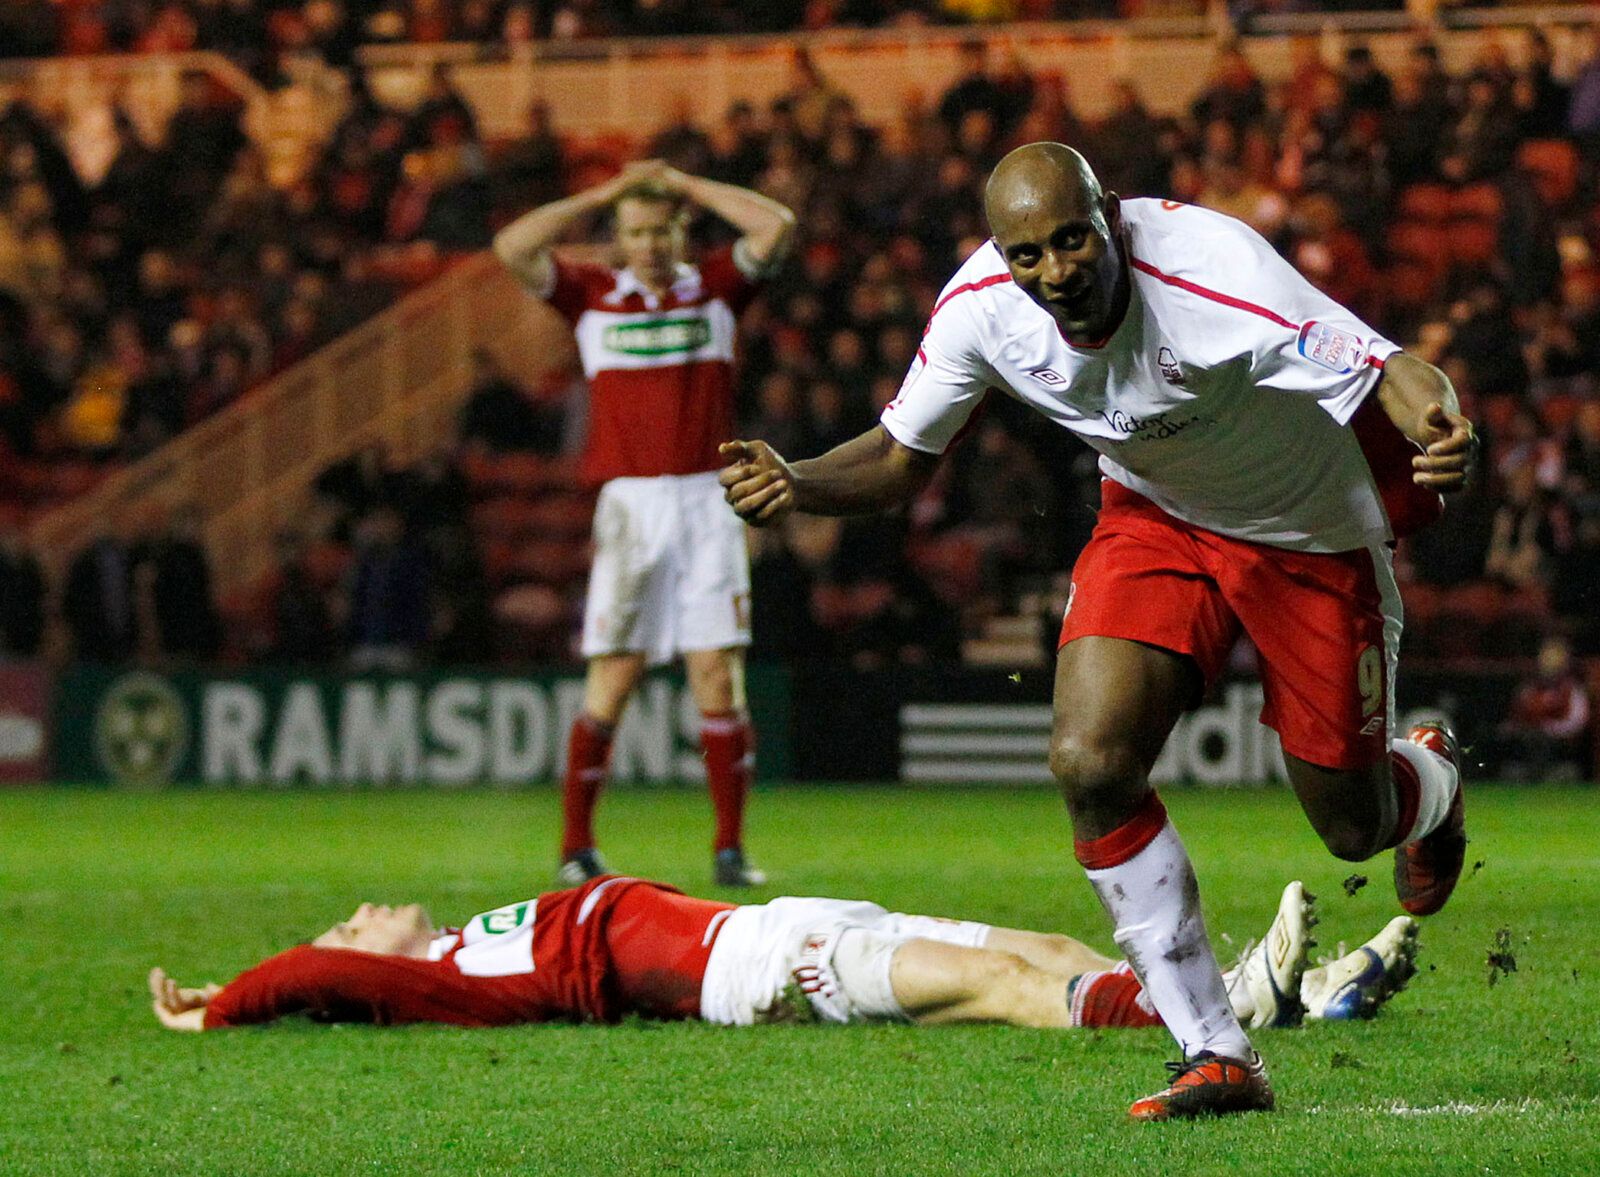 Football - Middlesbrough v Nottingham Forest npower Football League Championship - Riverside Stadium - 10/11 - 1/3/11 
Dele Adebola (R) celebrates scoring Nottingham Forest's first goal as Middlesbrough players look dejected 
Mandatory Credit: Action Images / Lee Smith 
Livepic